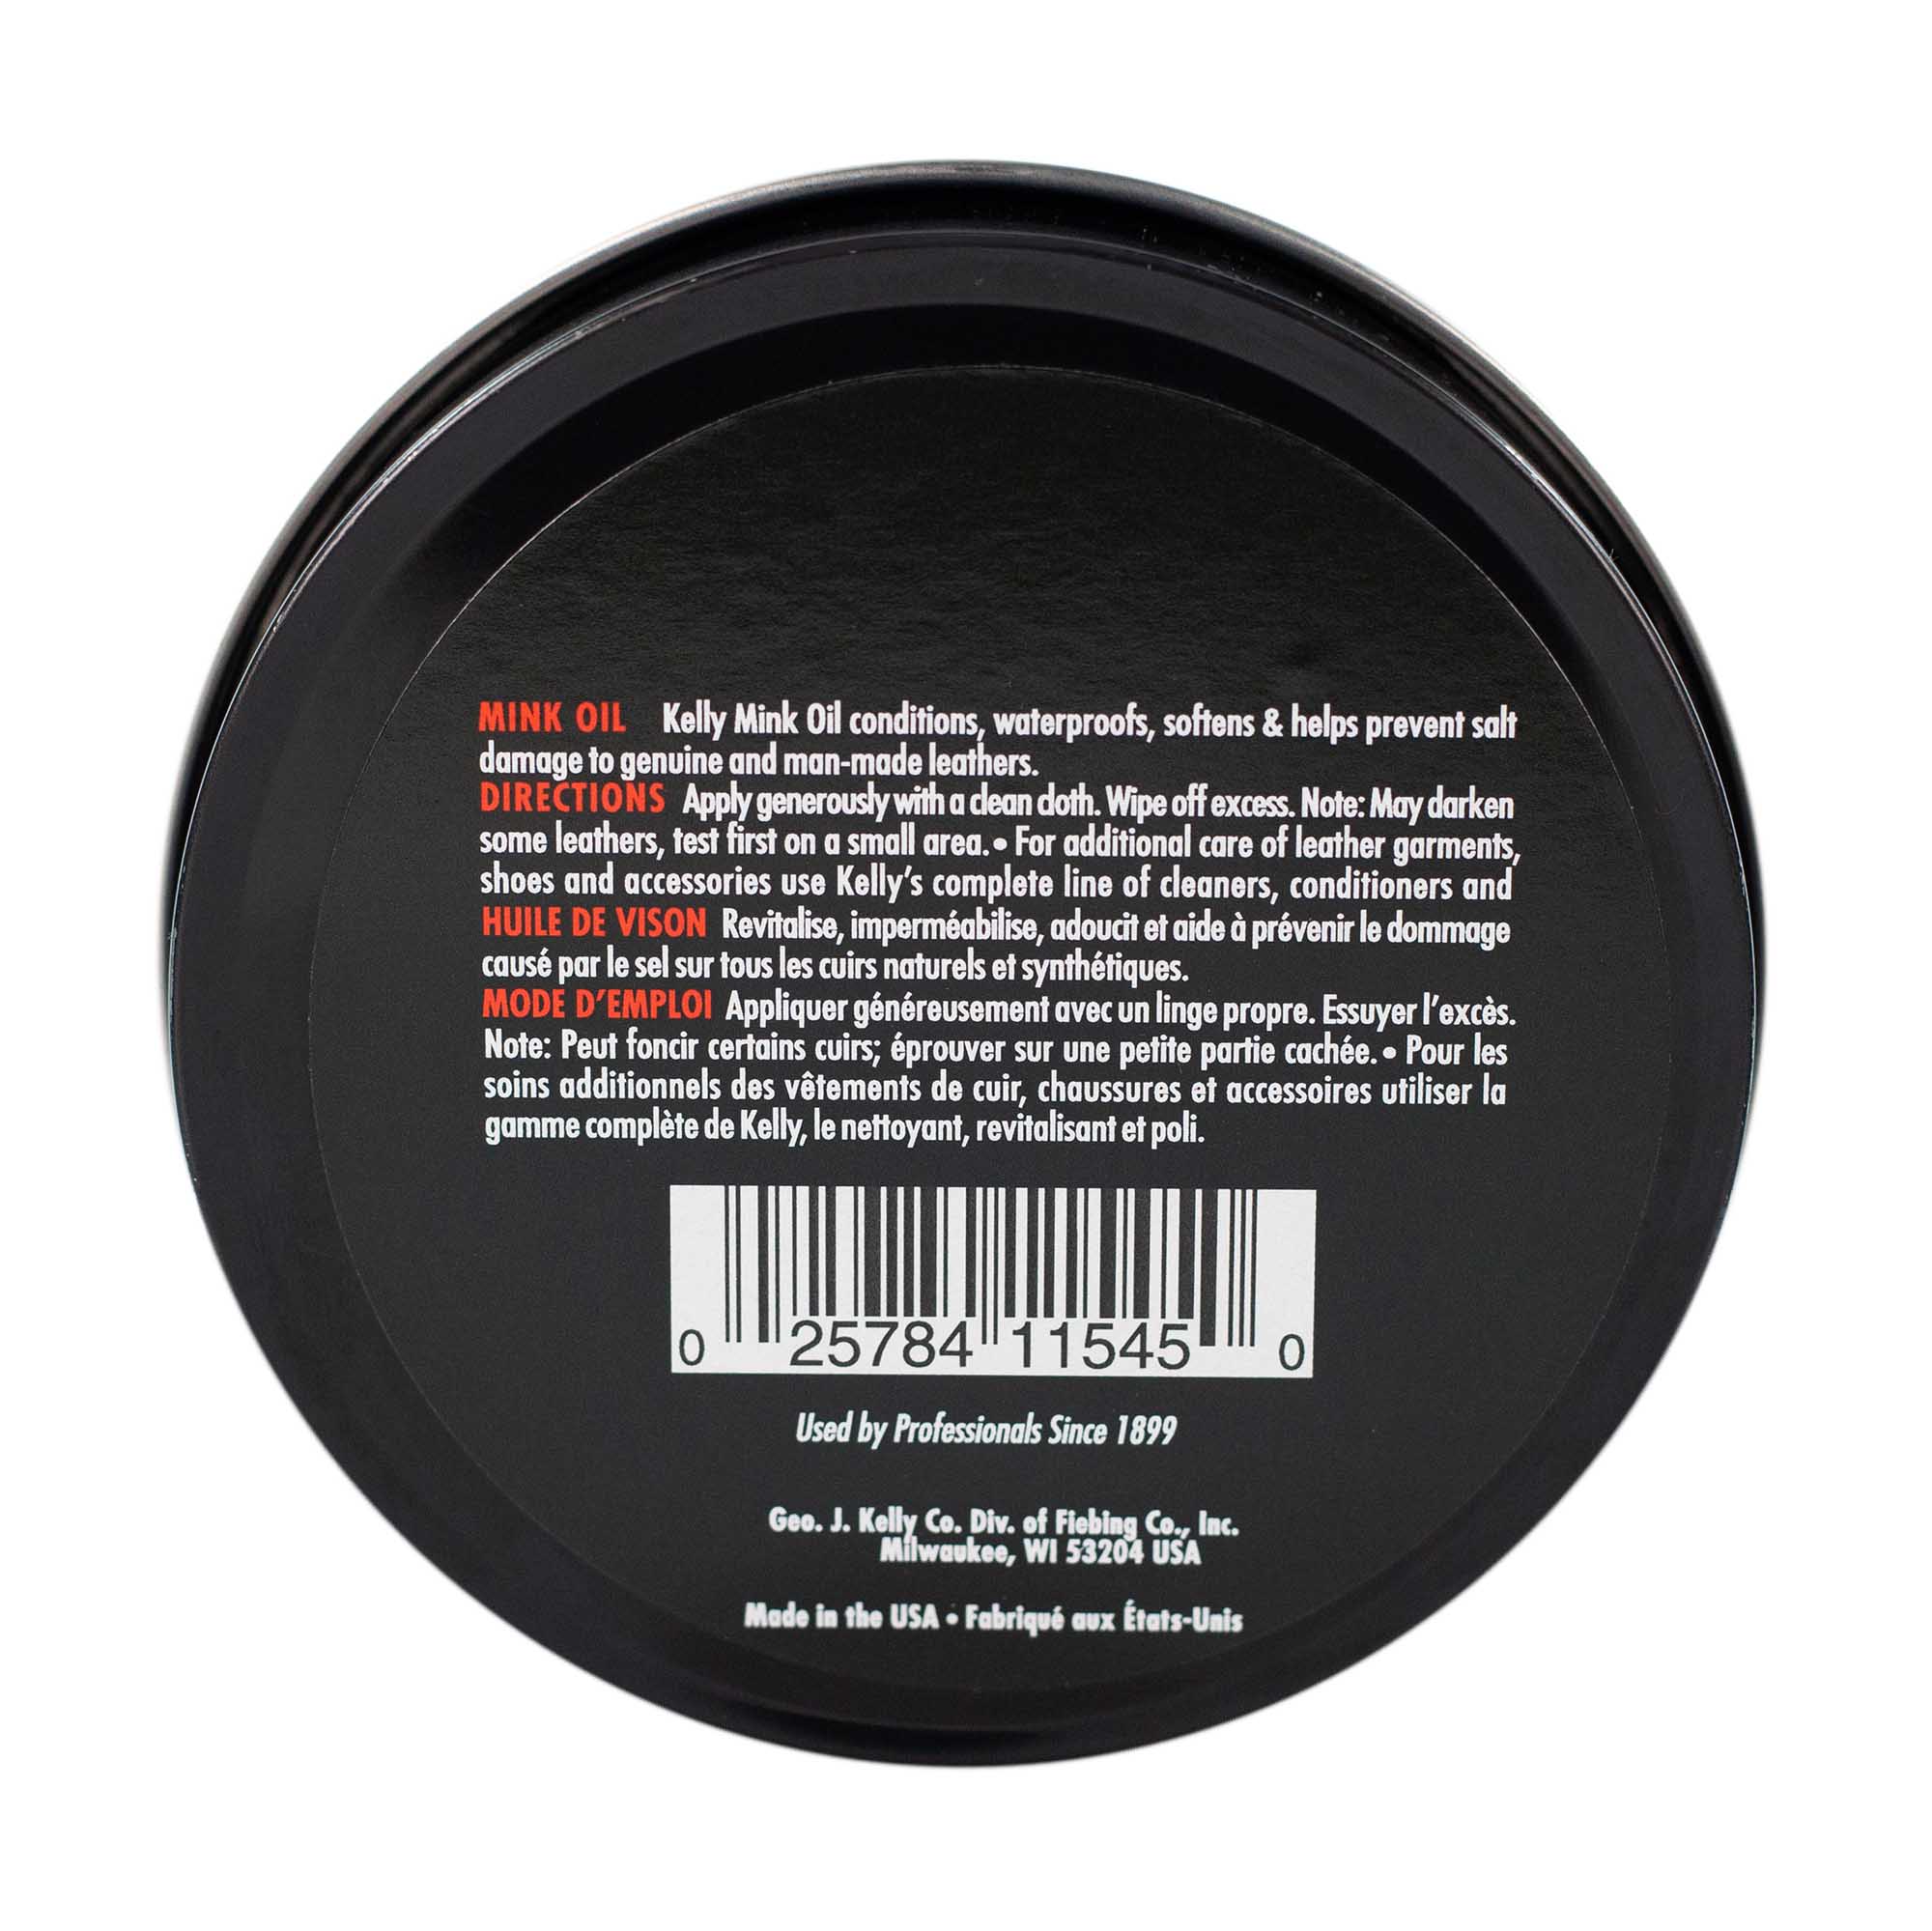 Dubbin Wax - best shoe wax, leather shoe protector and leather softener